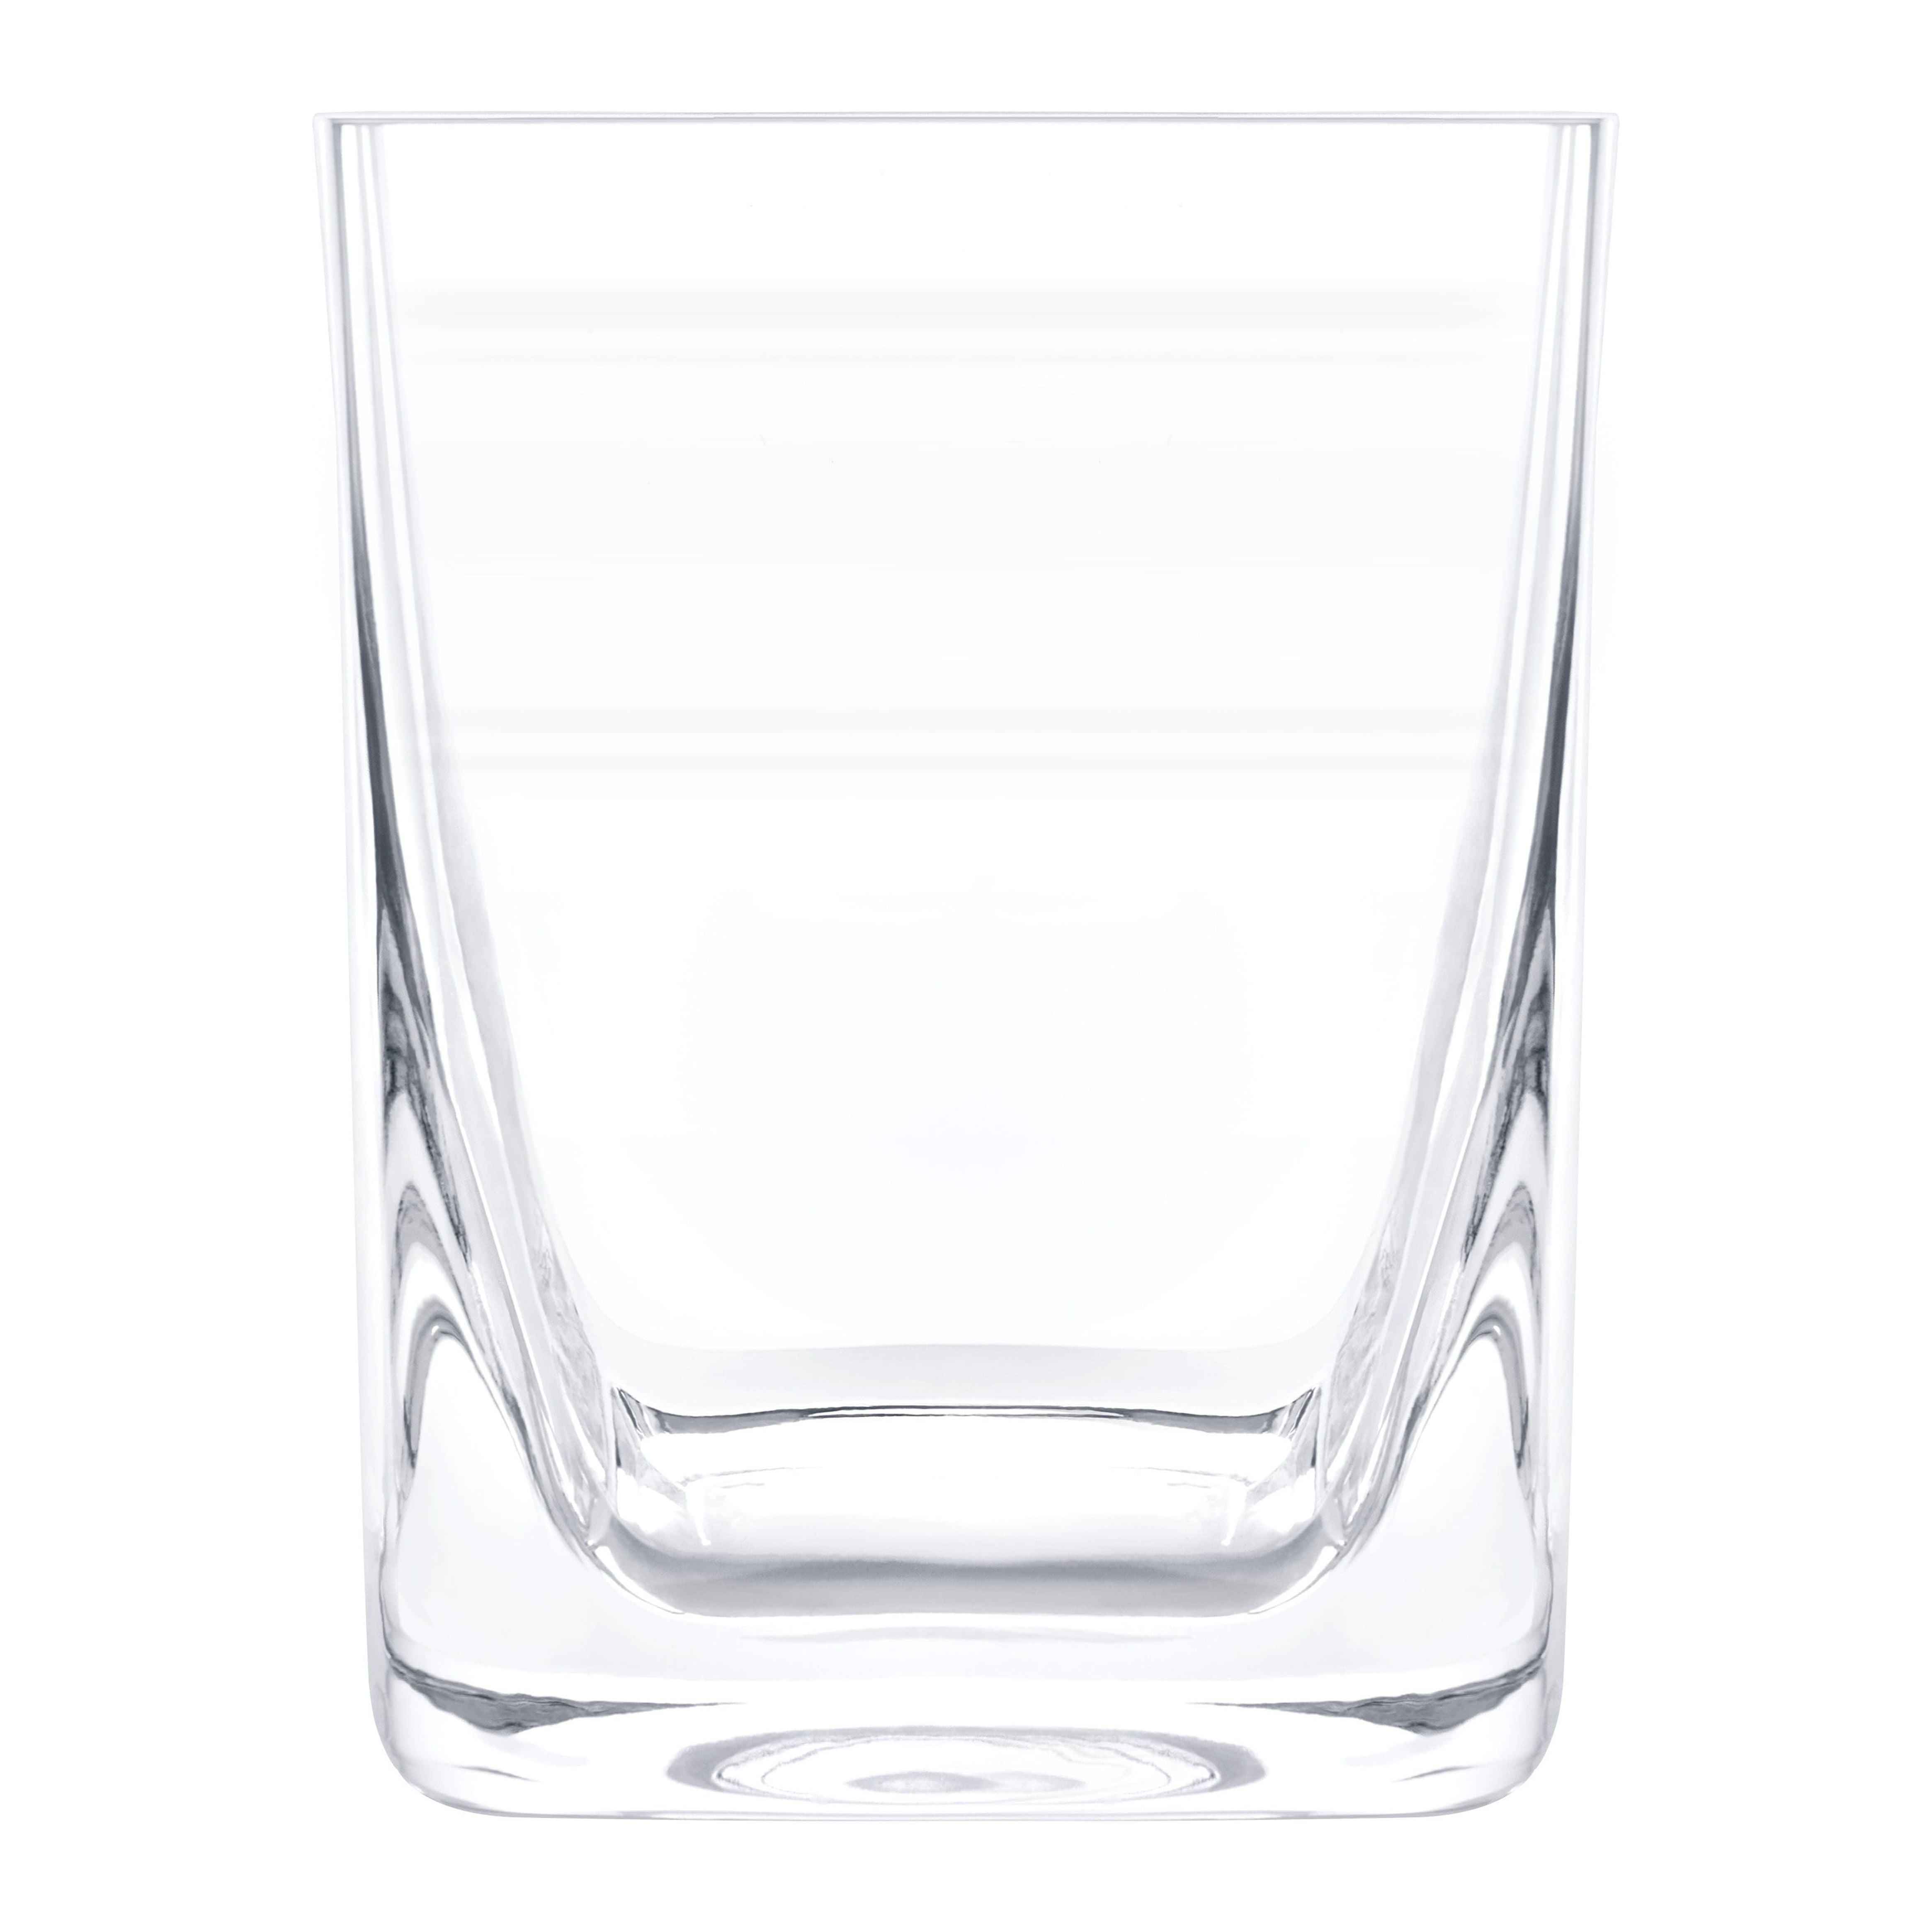 Corkcicle Premium 9 oz Double Old Fashioned Whiskey Glass with Silicone  Ice Mold, Perfect for Chilling Whiskey, Bourbon, Tequila, Scotch,  Mocktails, Original Whiskey Wedge, Holiday Gifts: Old Fashioned Glasses